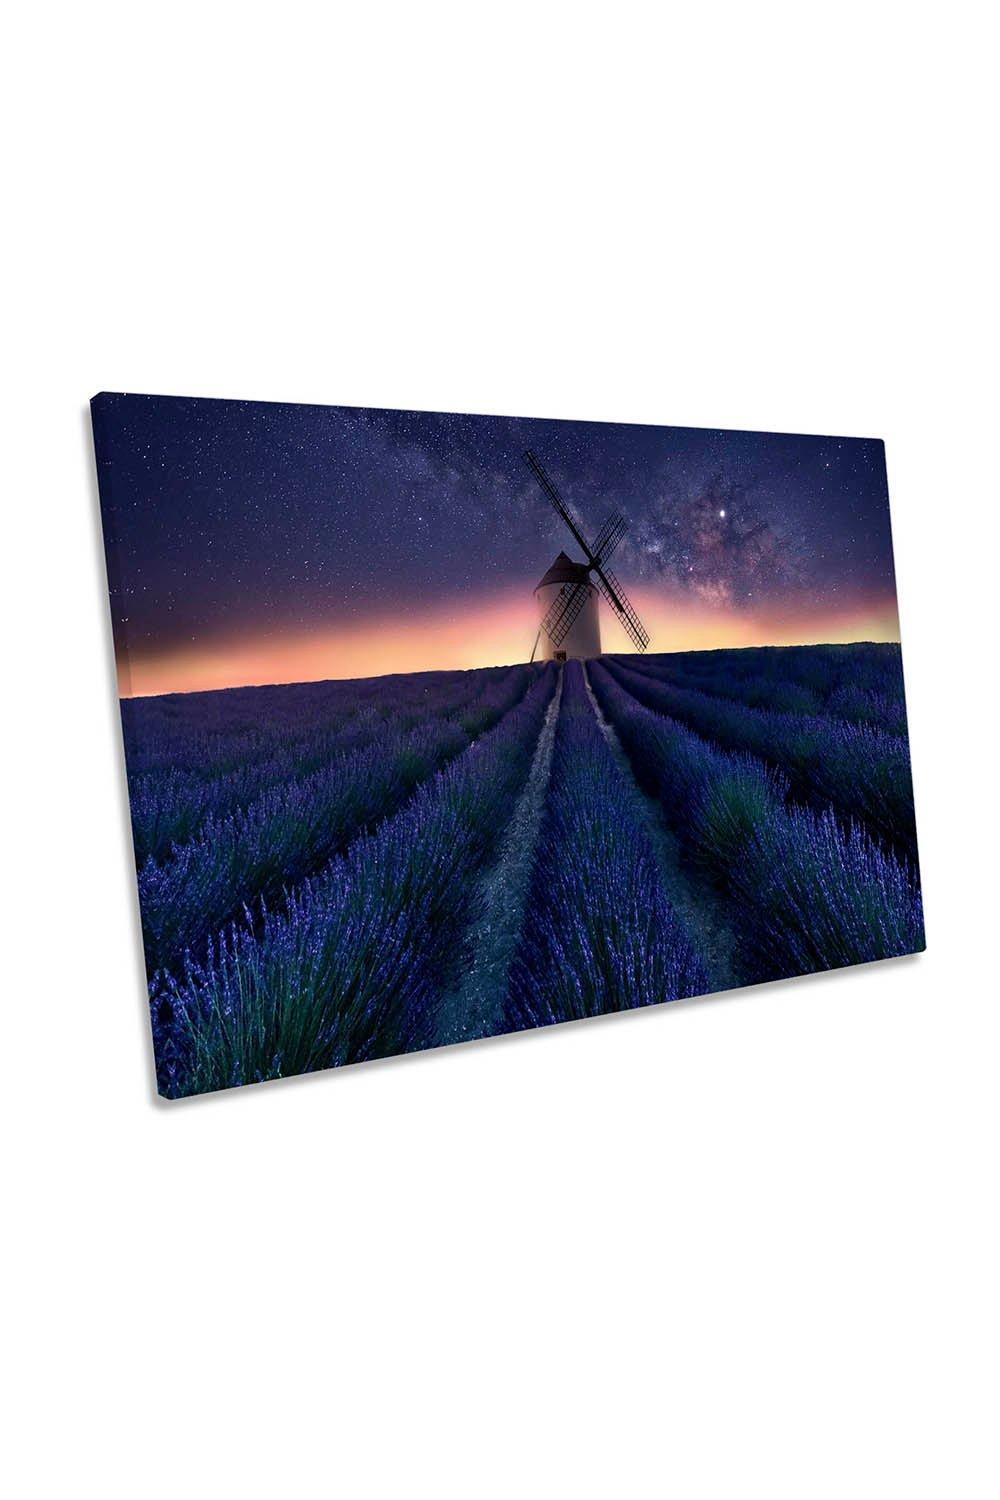 Lavender Night Windmill Canvas Wall Art Picture Print